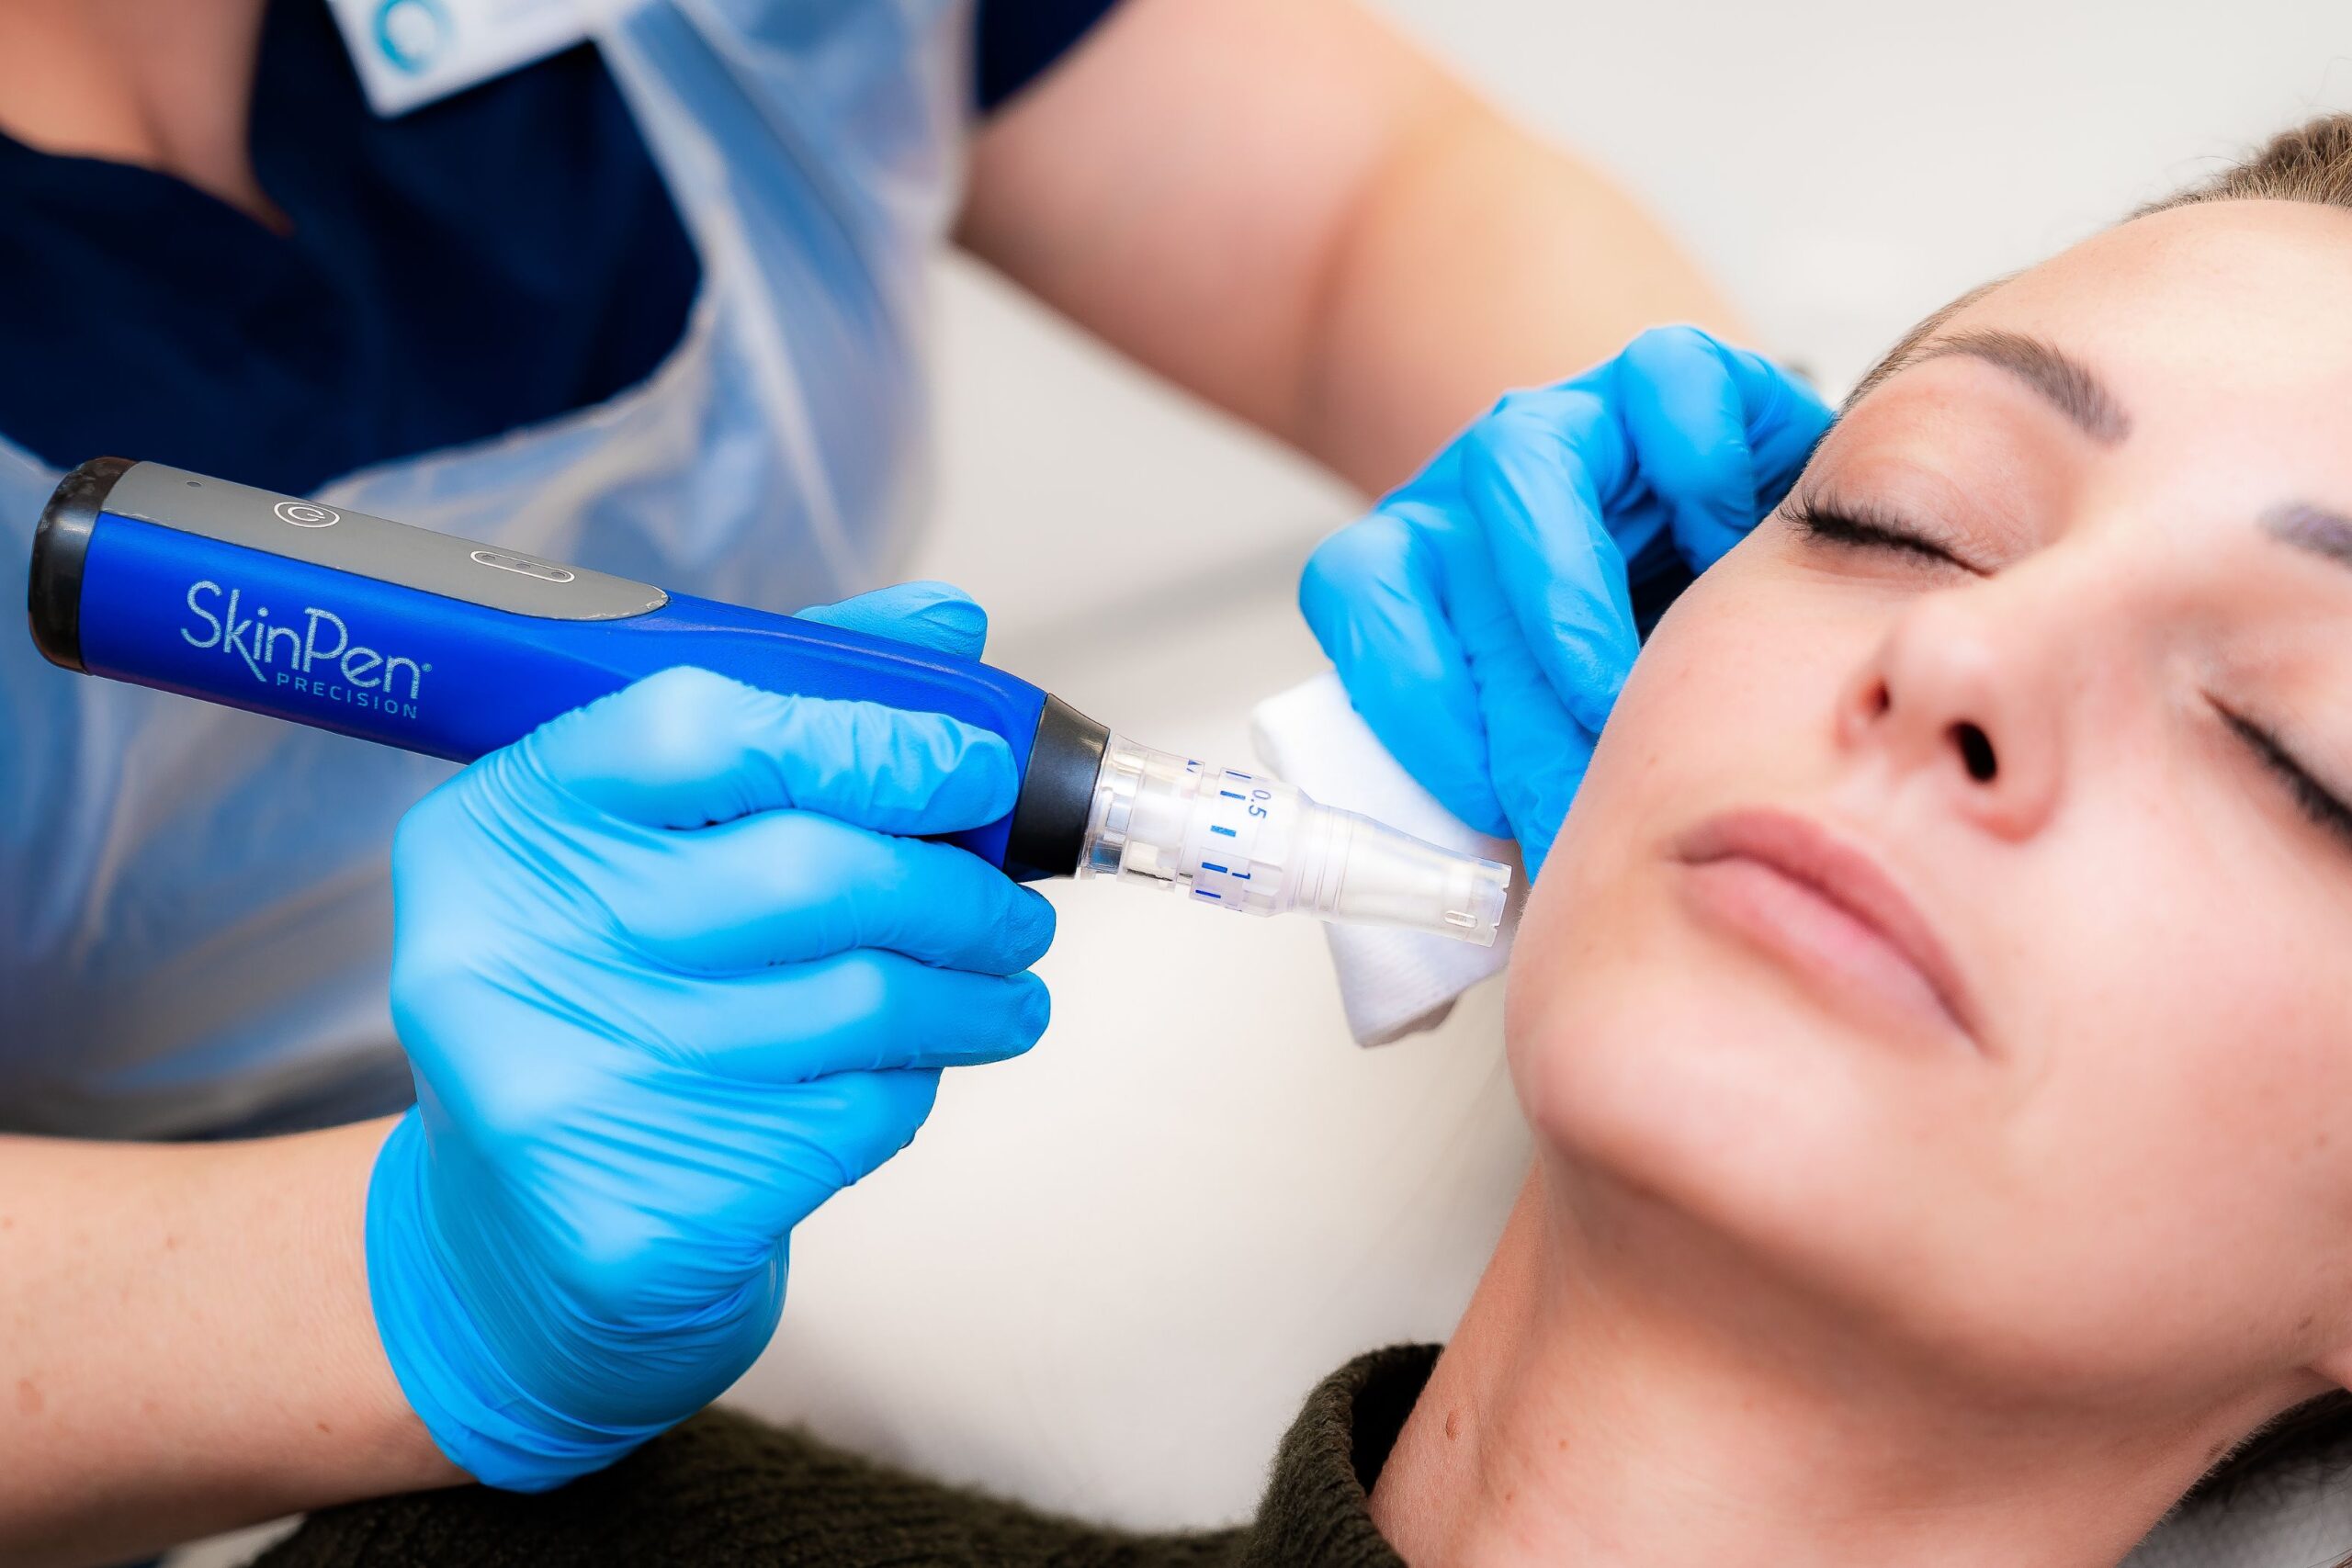 Microneedling for uneven skin tone and pigmentation at Freyja Medical in Wrexham, Nantwich and Cheshire